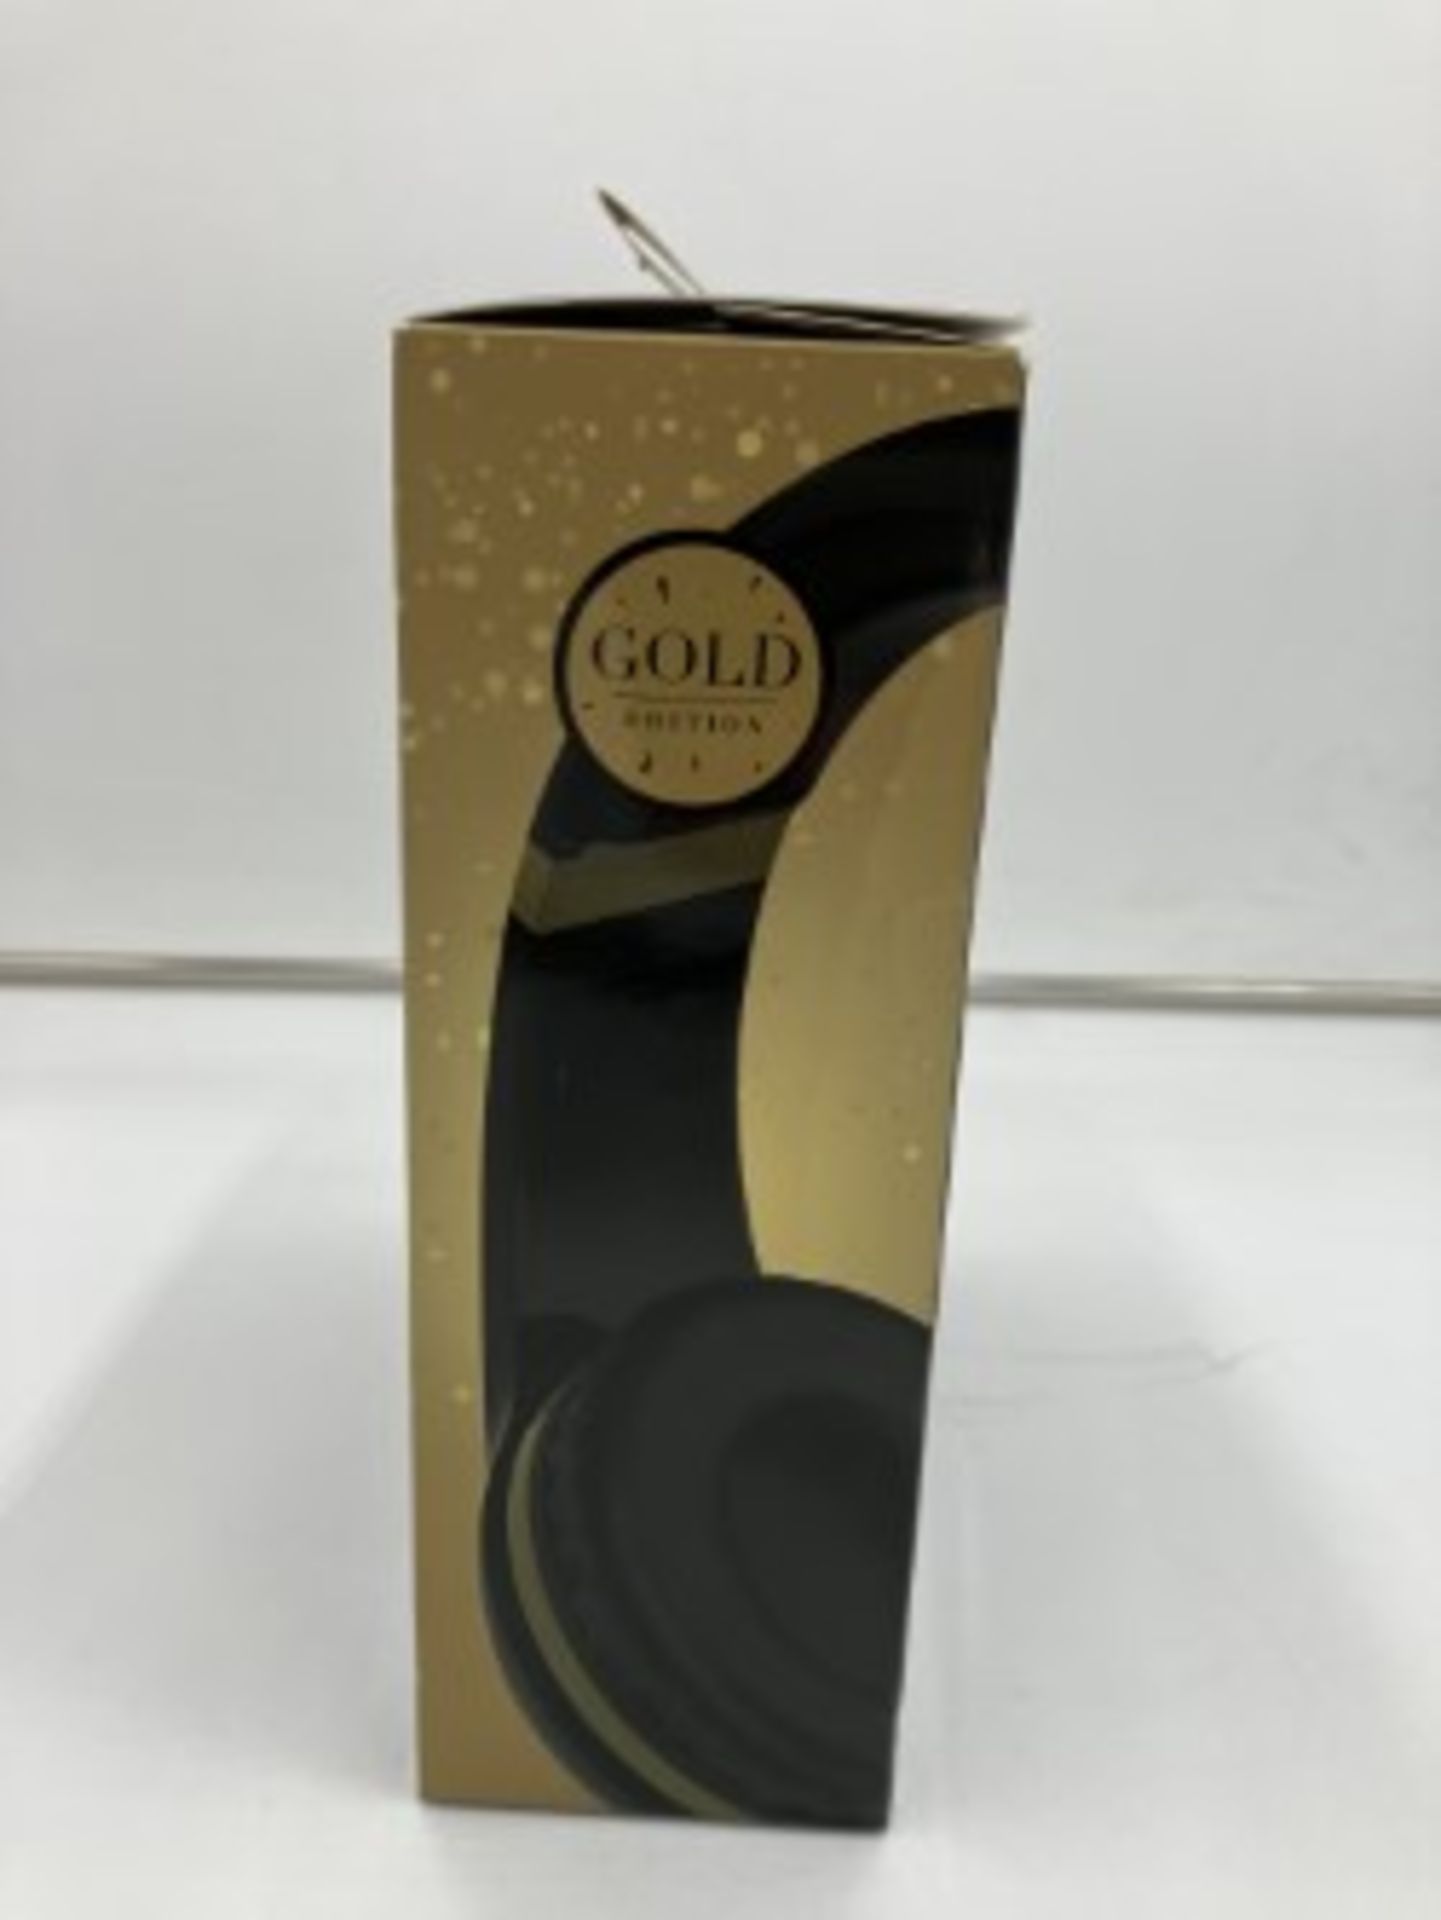 STEALTH GAMING HEADSET - GOLD EDITION - 9723 - Image 2 of 3